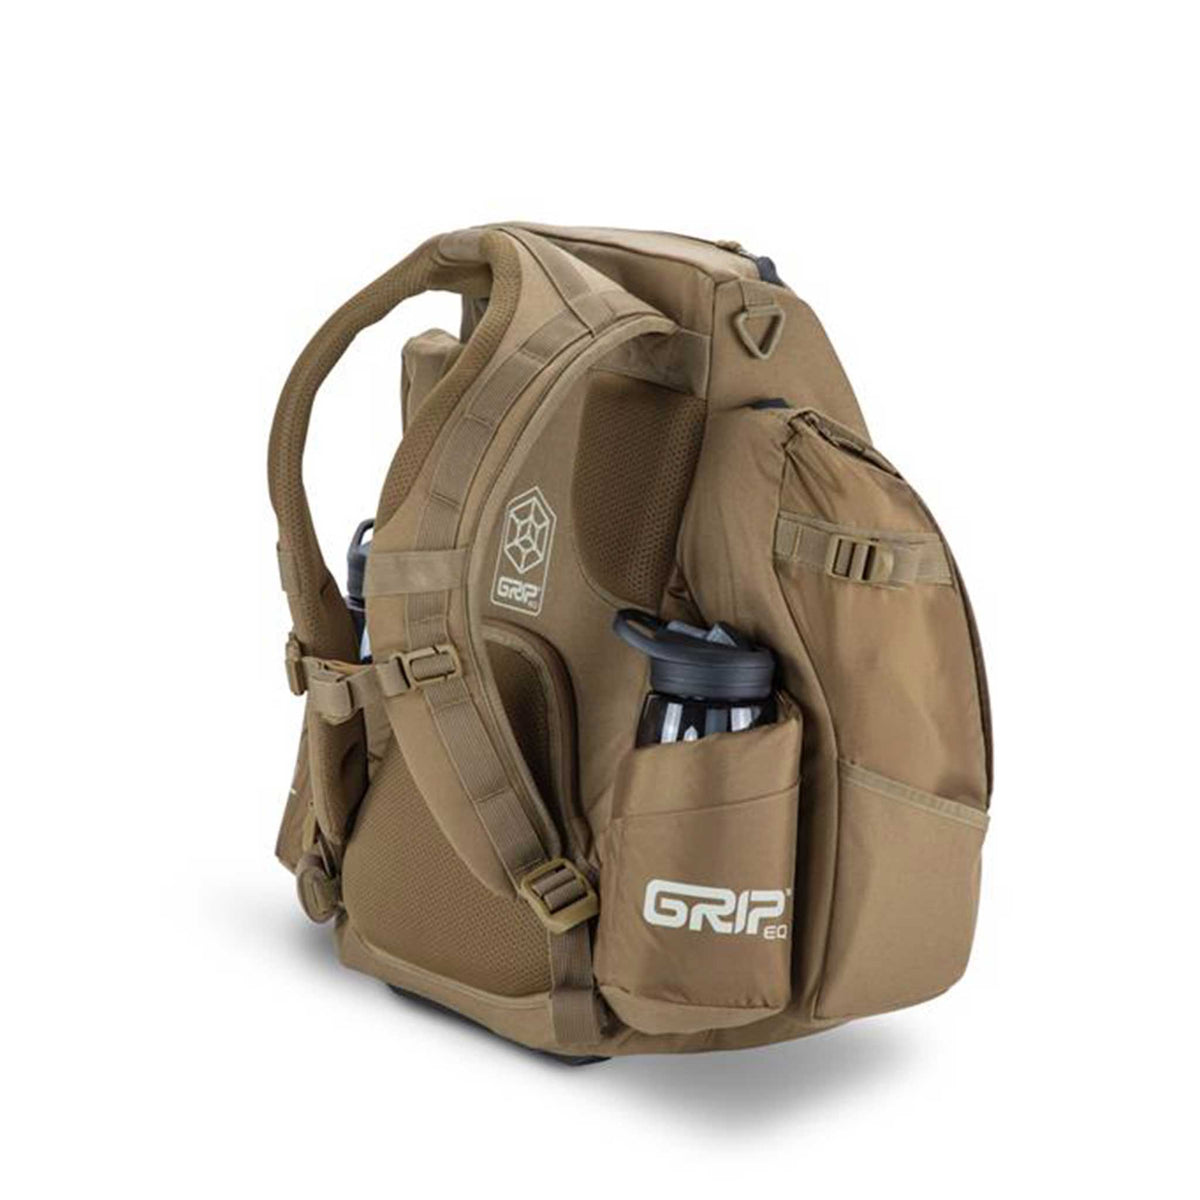 Grip BX3 Buzzz Disc Golf Bag bottle pockets and padded back